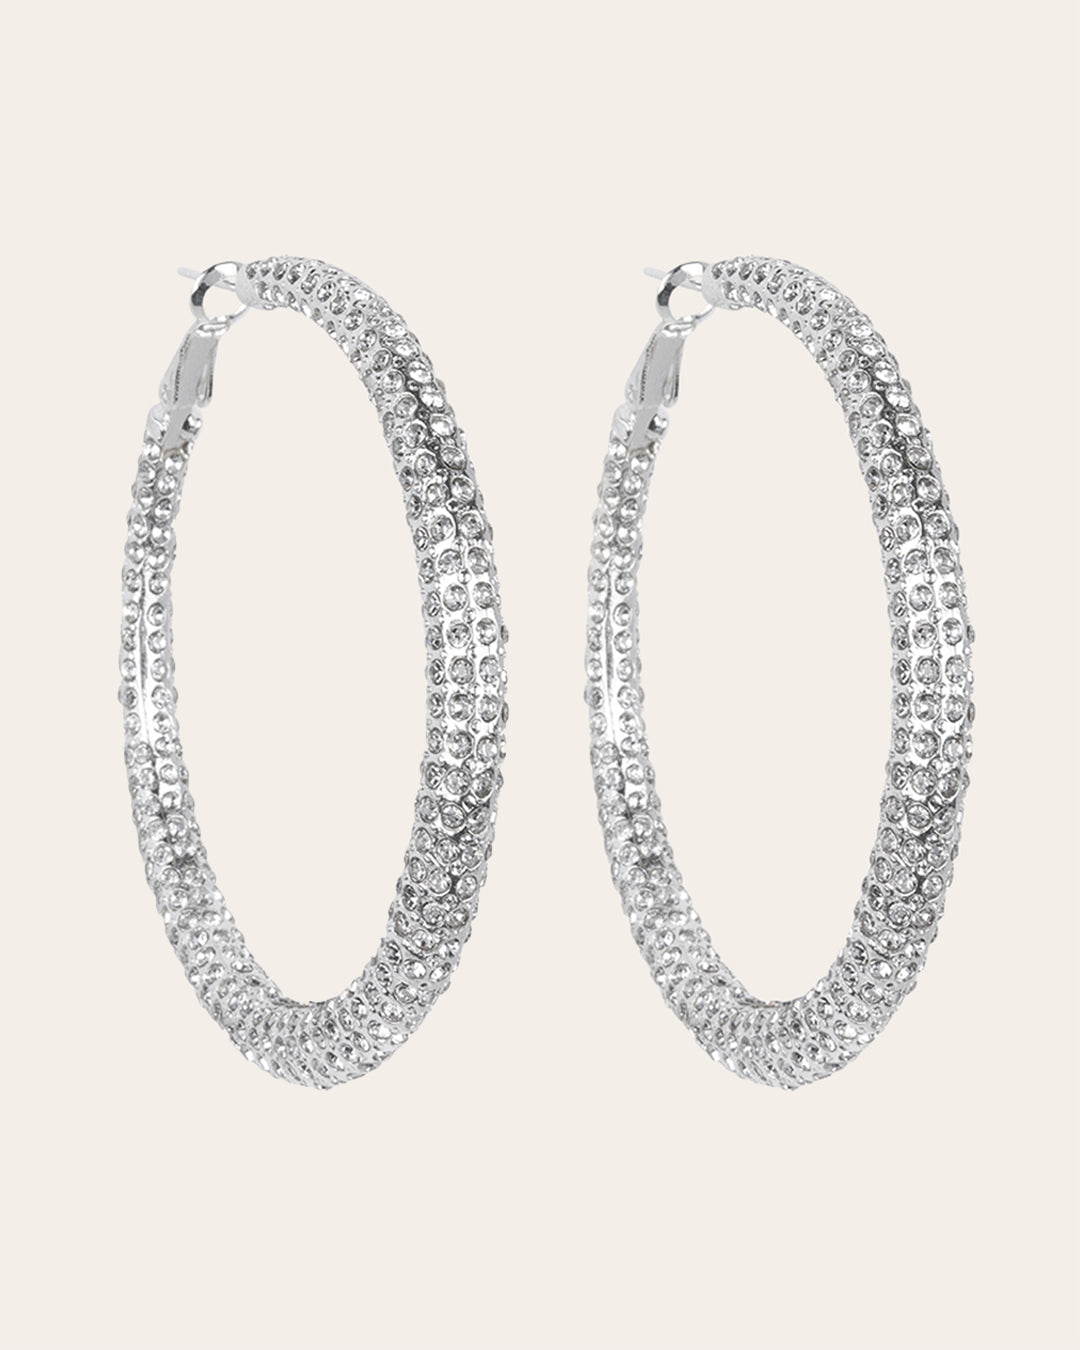 The Gisele hoops - silver plated